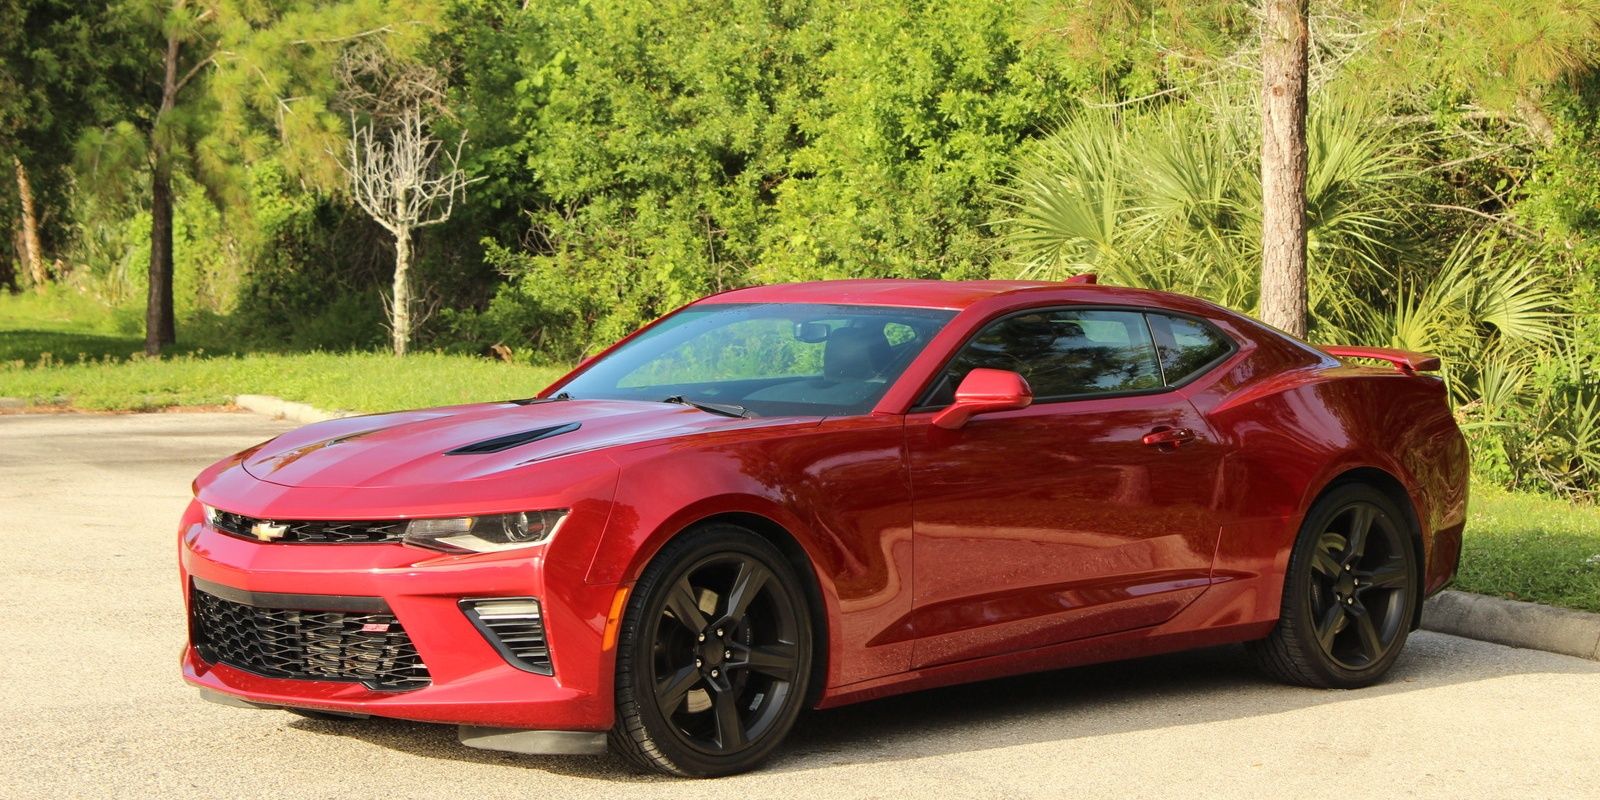 Red 2018 Chevrolet Camaro 1SS Muscle Car